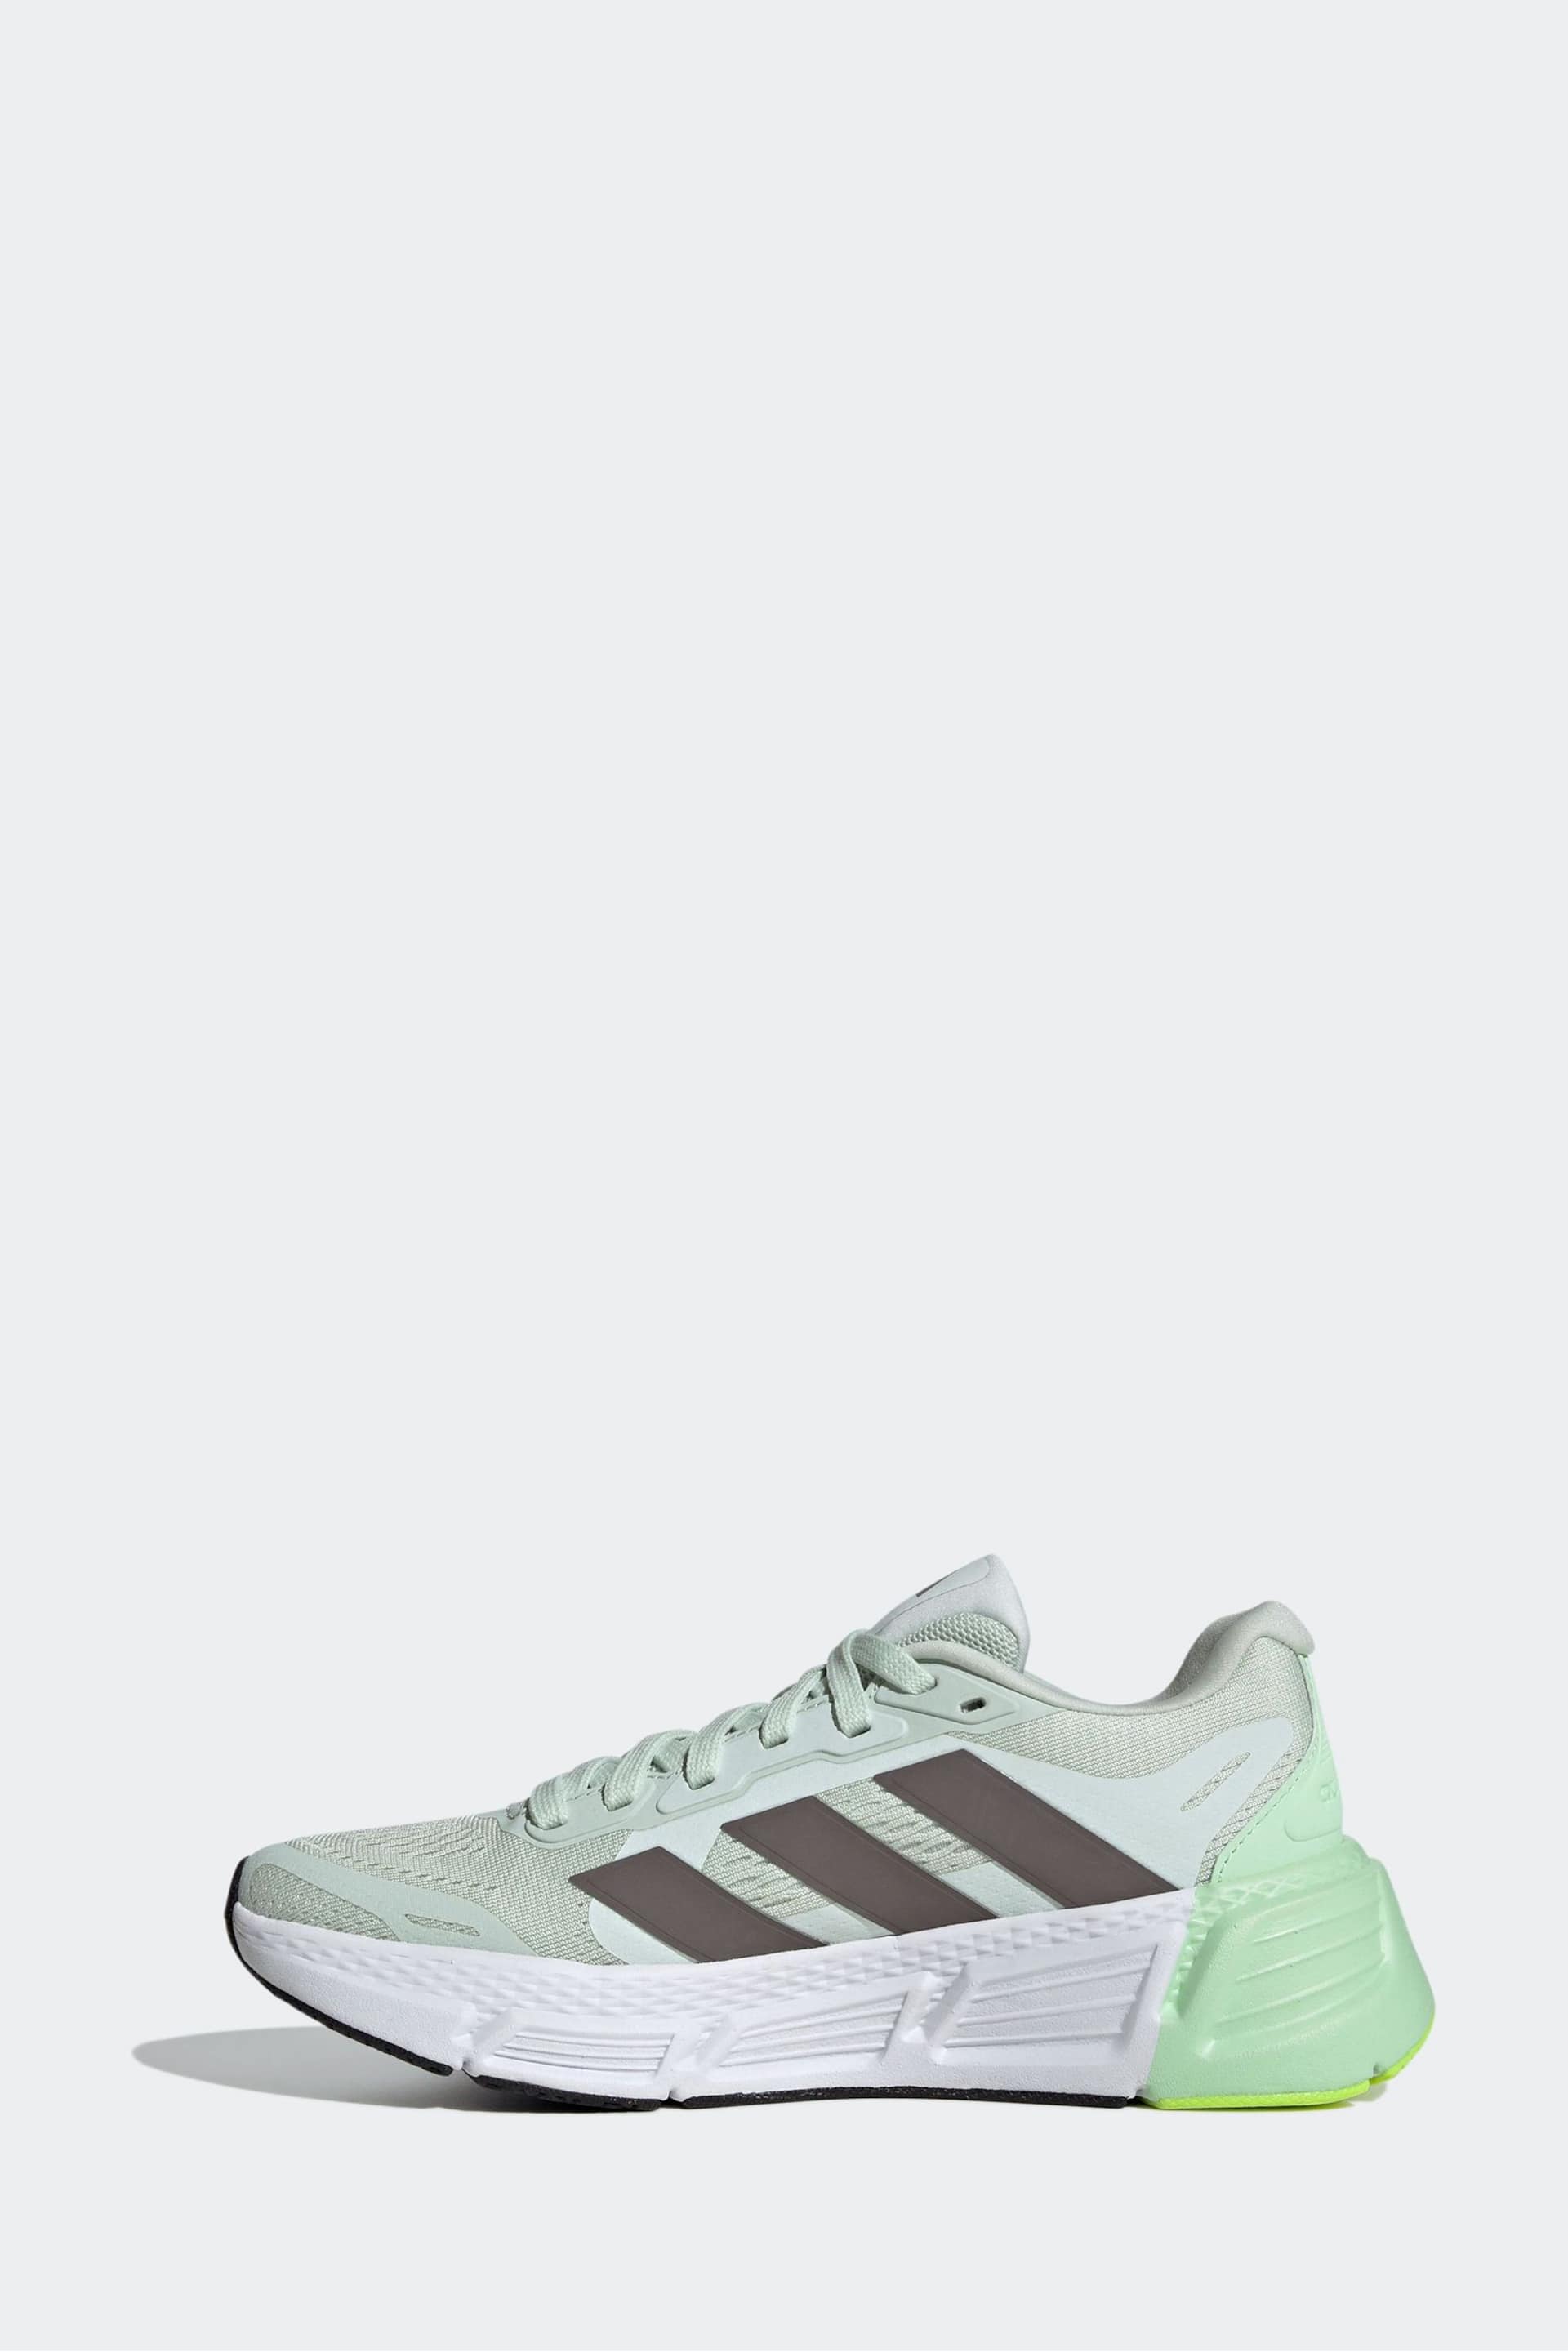 adidas Green Questar Trainers - Image 2 of 9